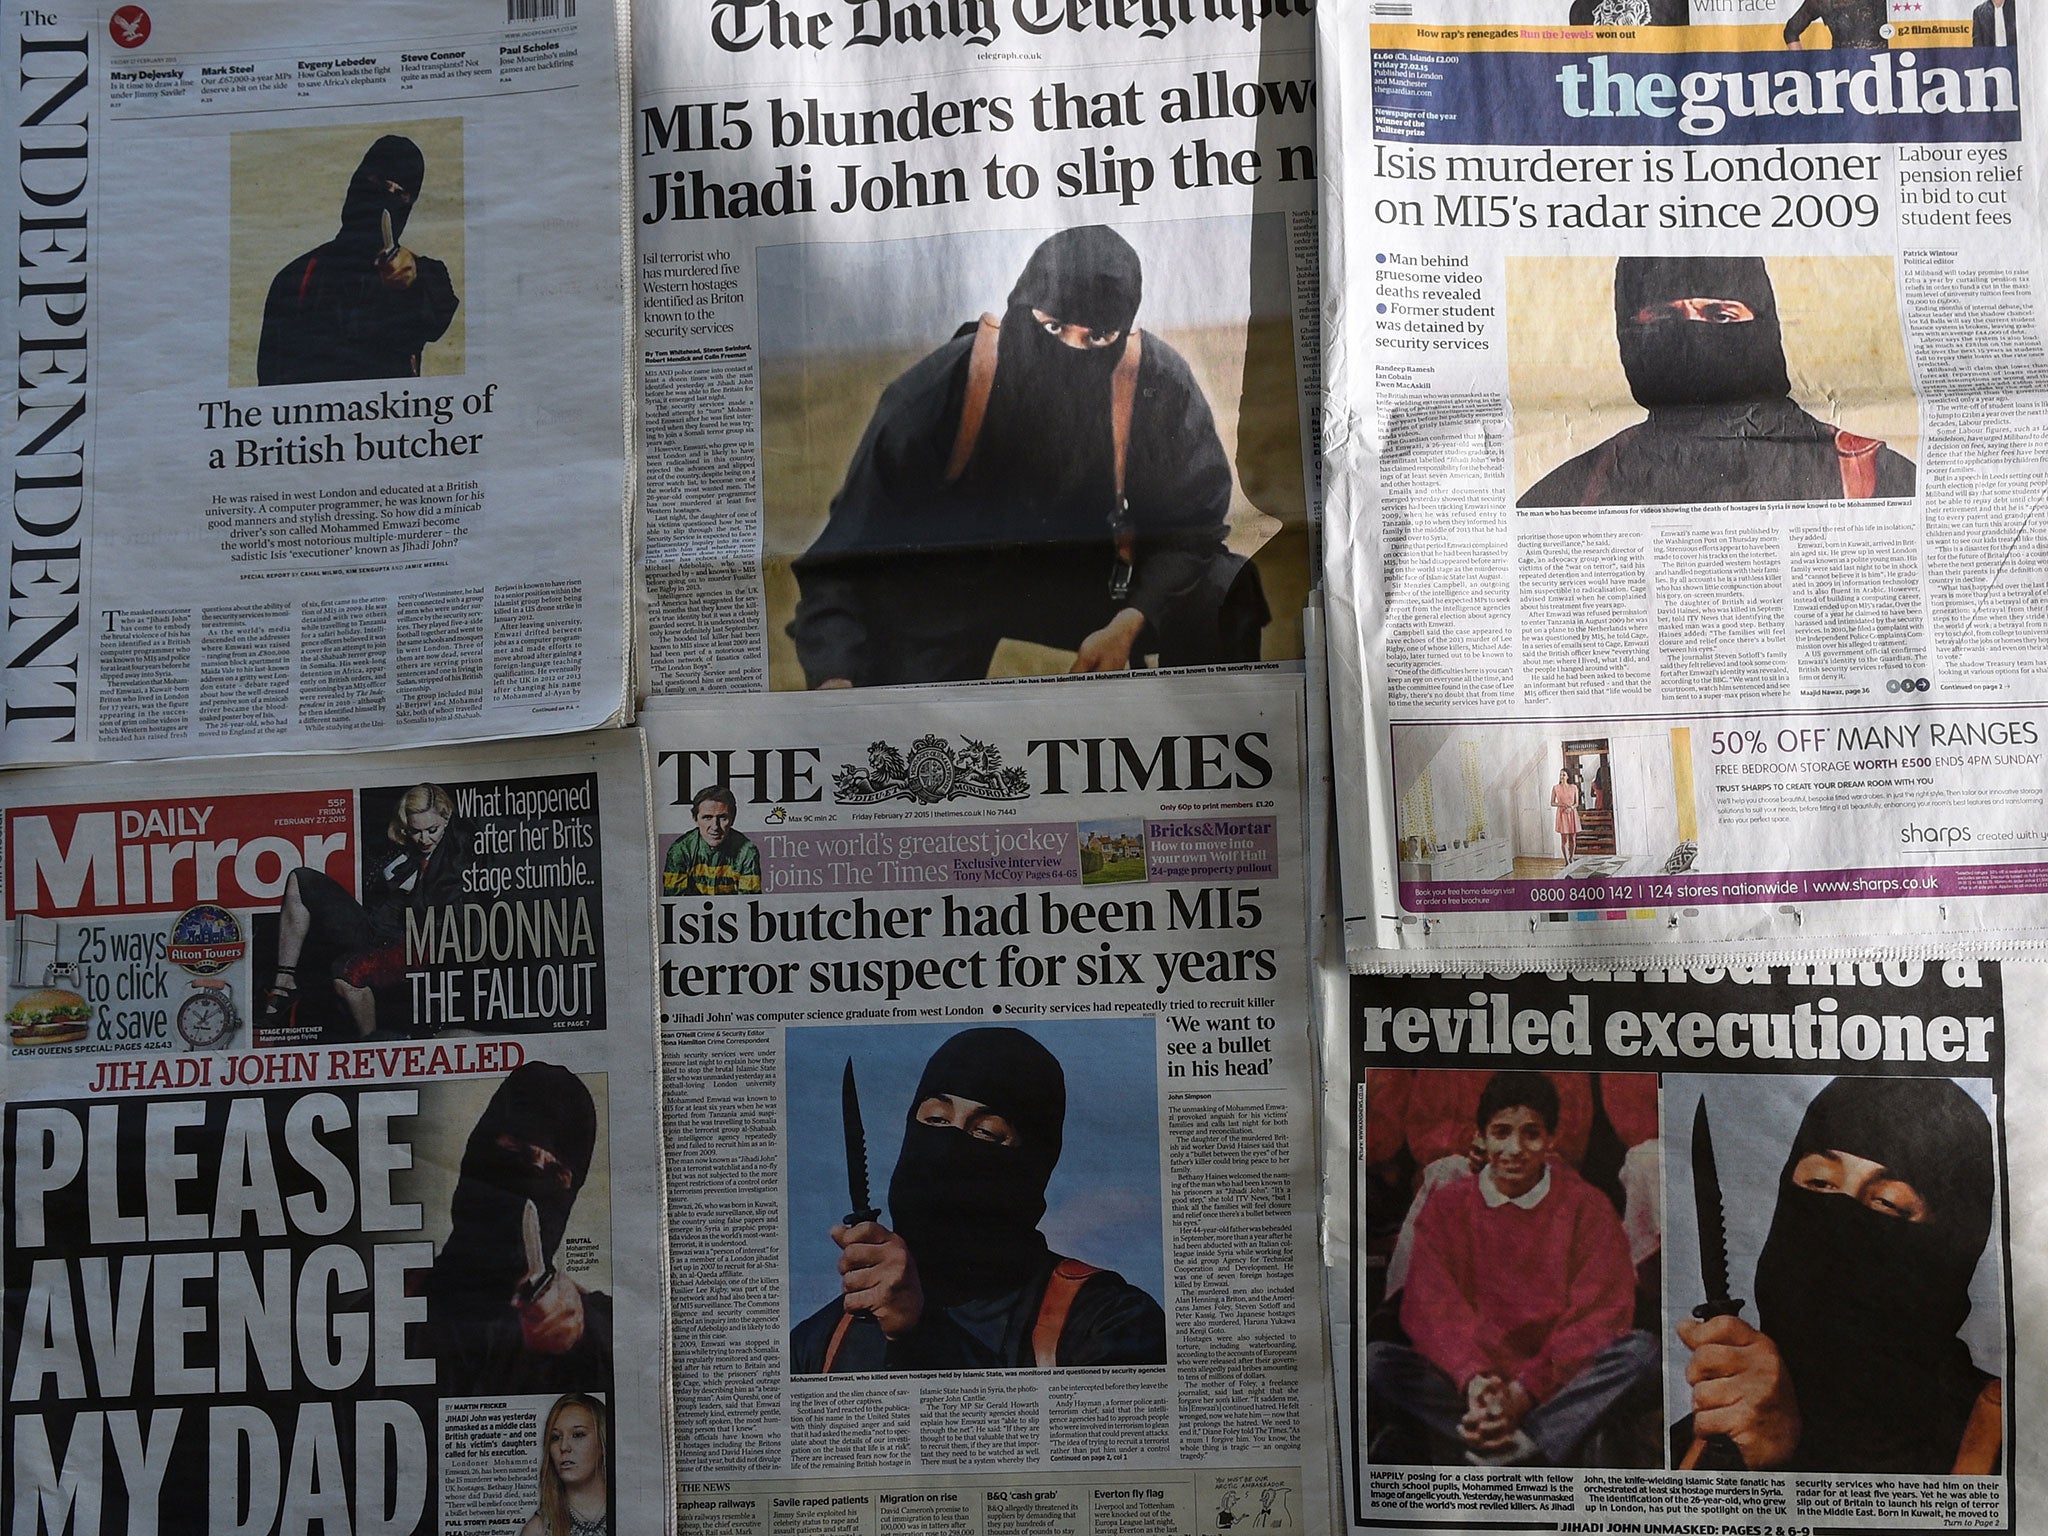 Jihadi John, or Mohammed Emwazi, is one of the 'Five Brits a week' who travel to fight for Isis